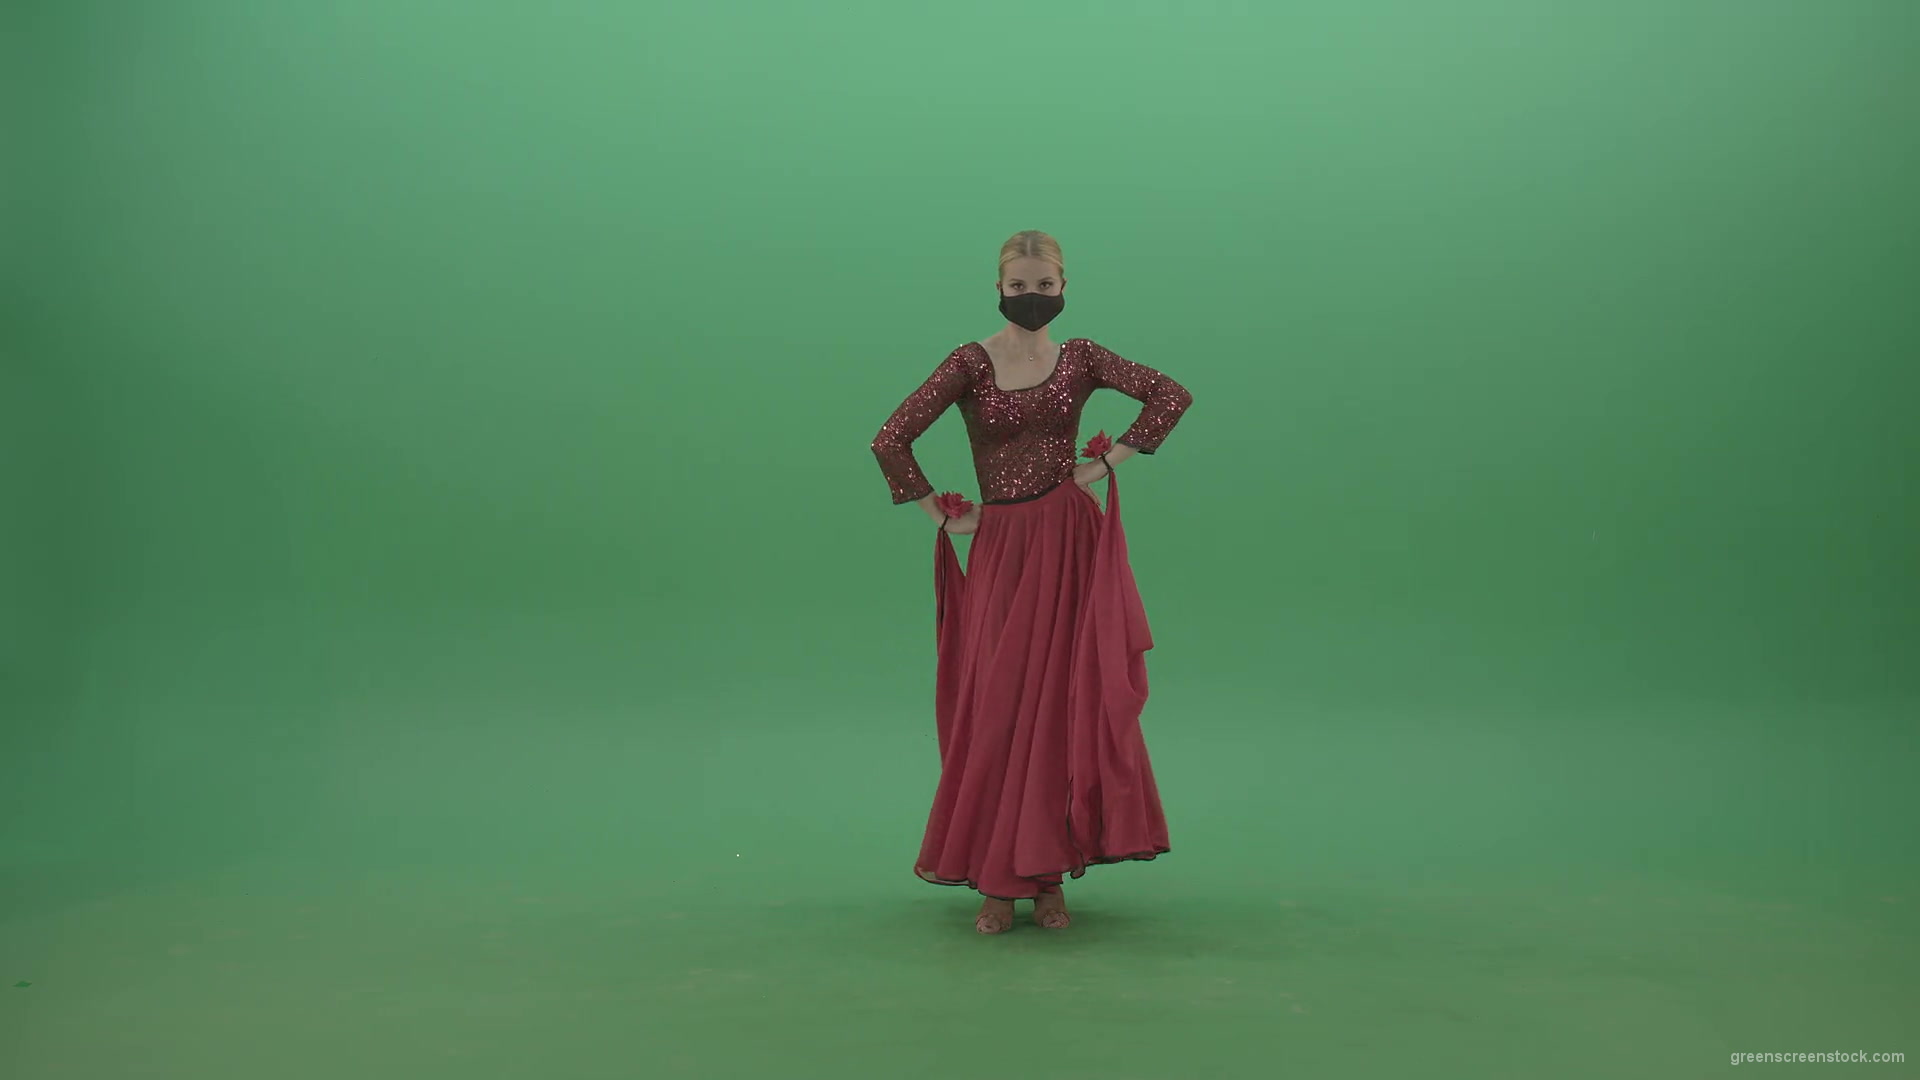 Beauty-Girl-with-black-mask-in-red-rumba-dress-waving-arms-isolated-on-green-screen-4K-Video-Footage-1920_006 Green Screen Stock